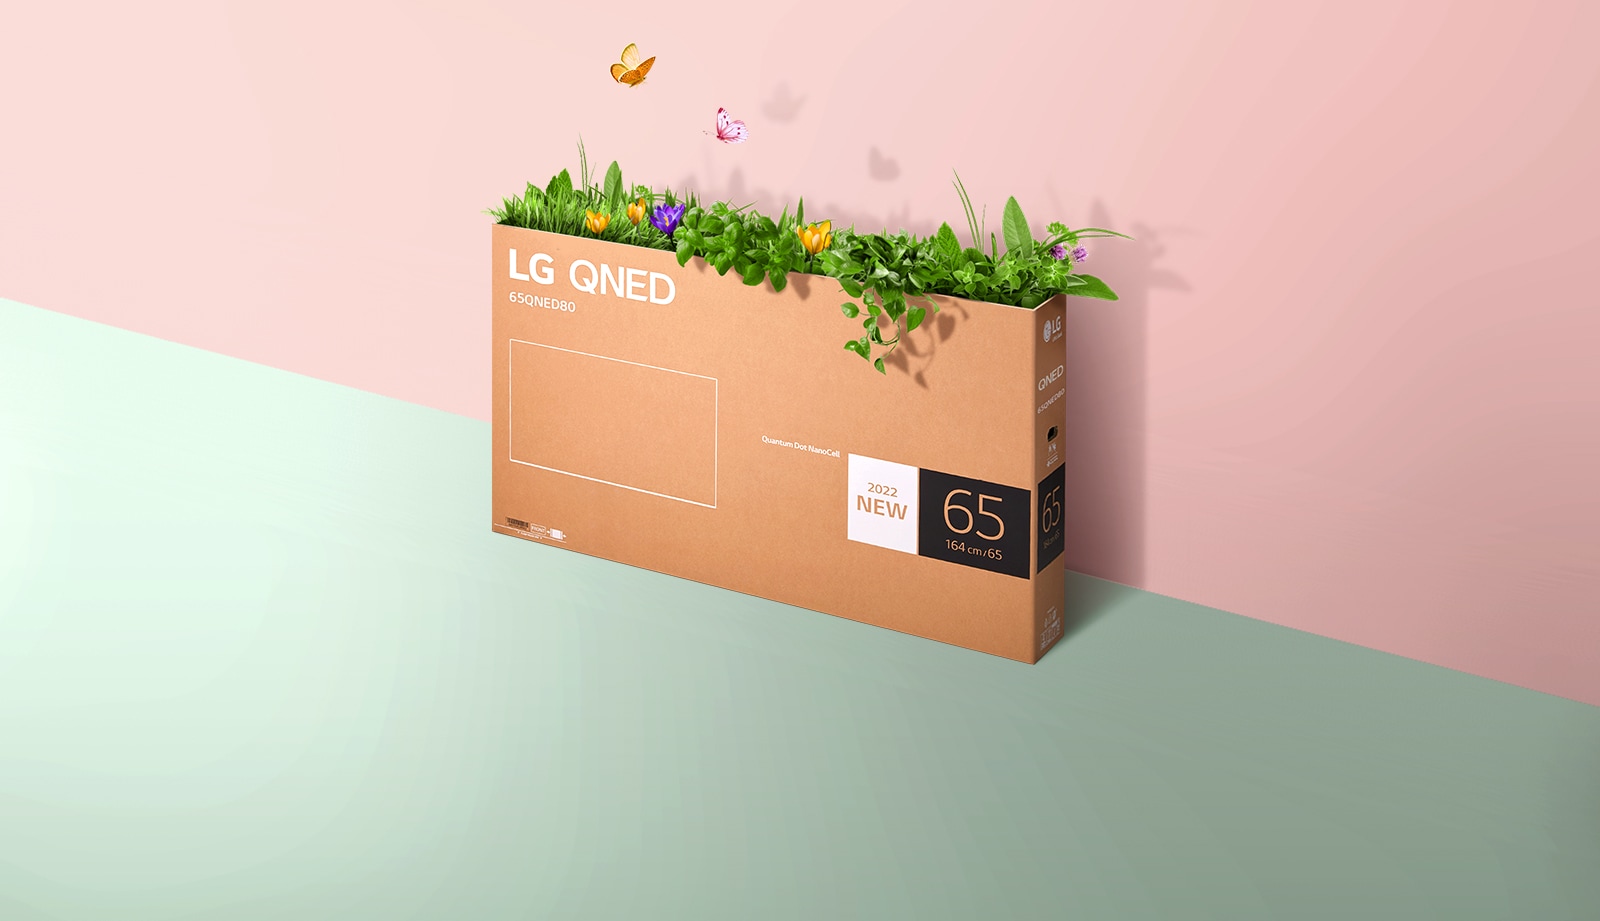 A QNED packing box is placed on a pink and green background and grass grows and butterflies come out of it.